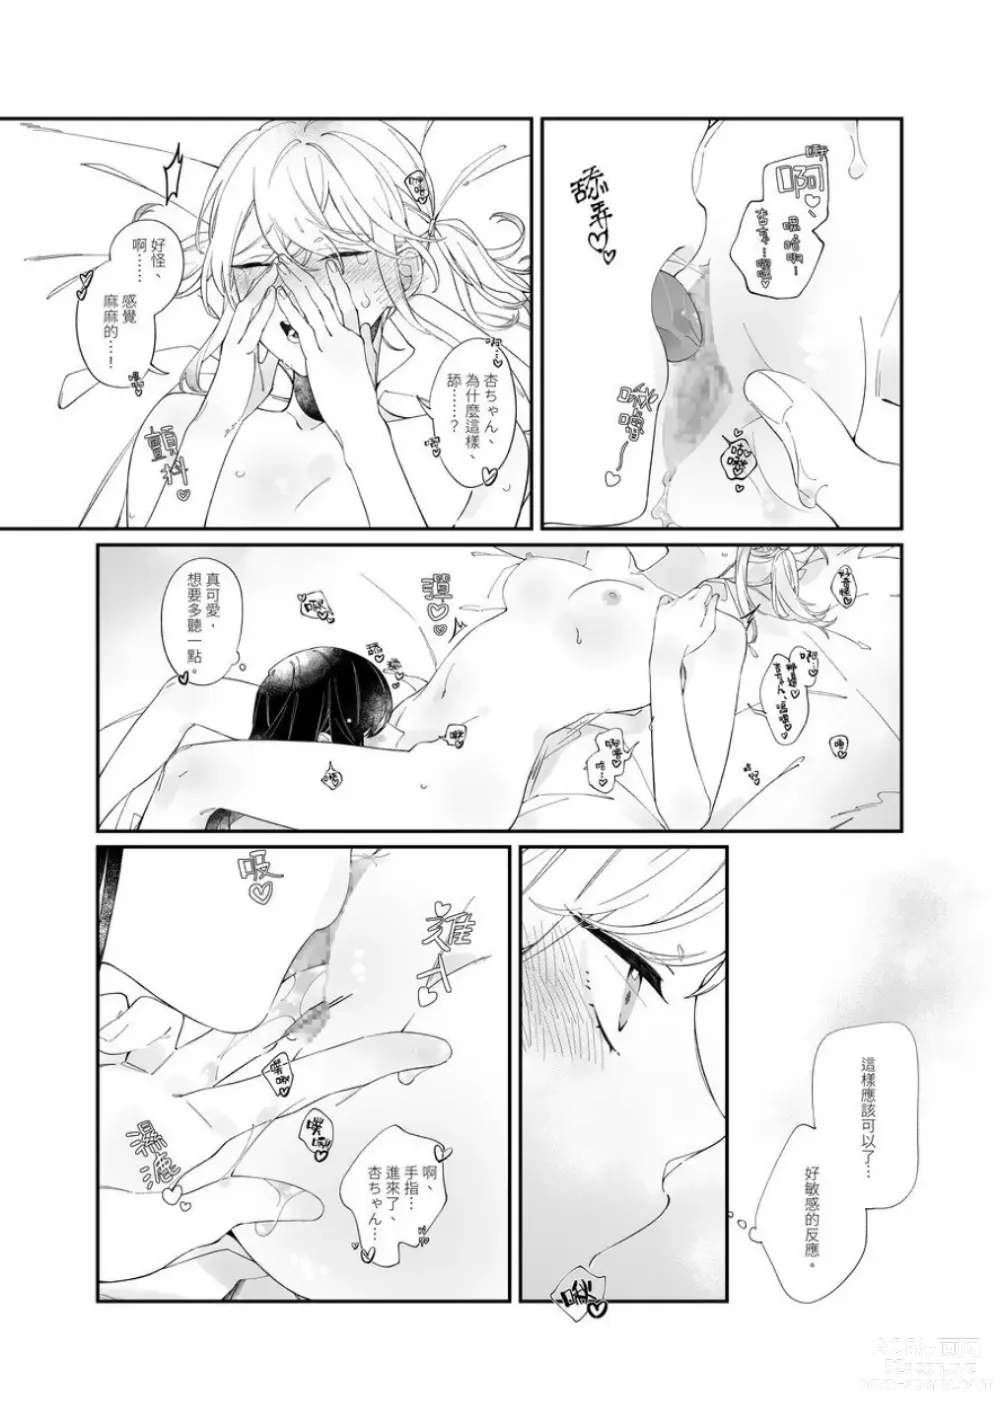 Page 14 of doujinshi 《First Time はじめての》